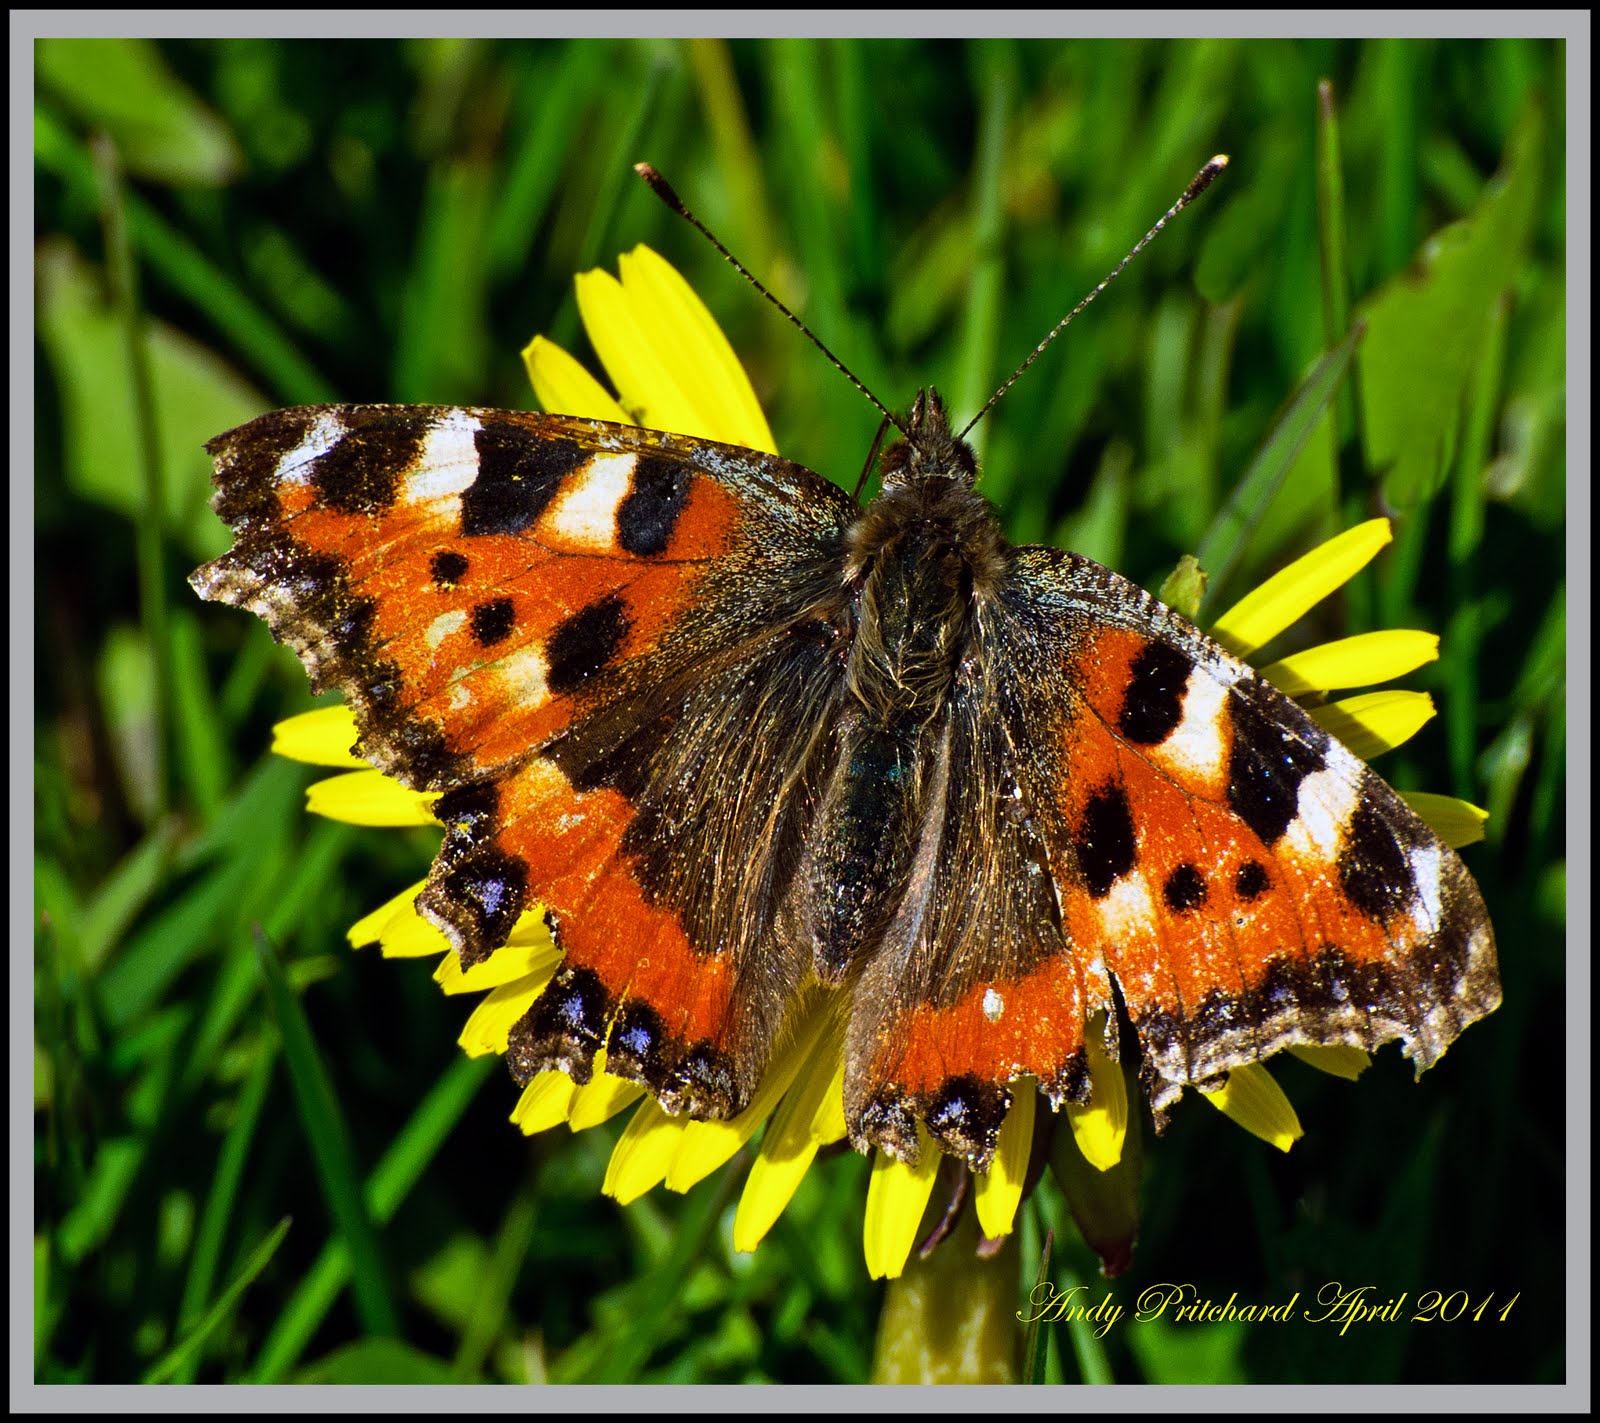 Andy Images: A Tortoise Shell Butterfly Enjoying Some Sun